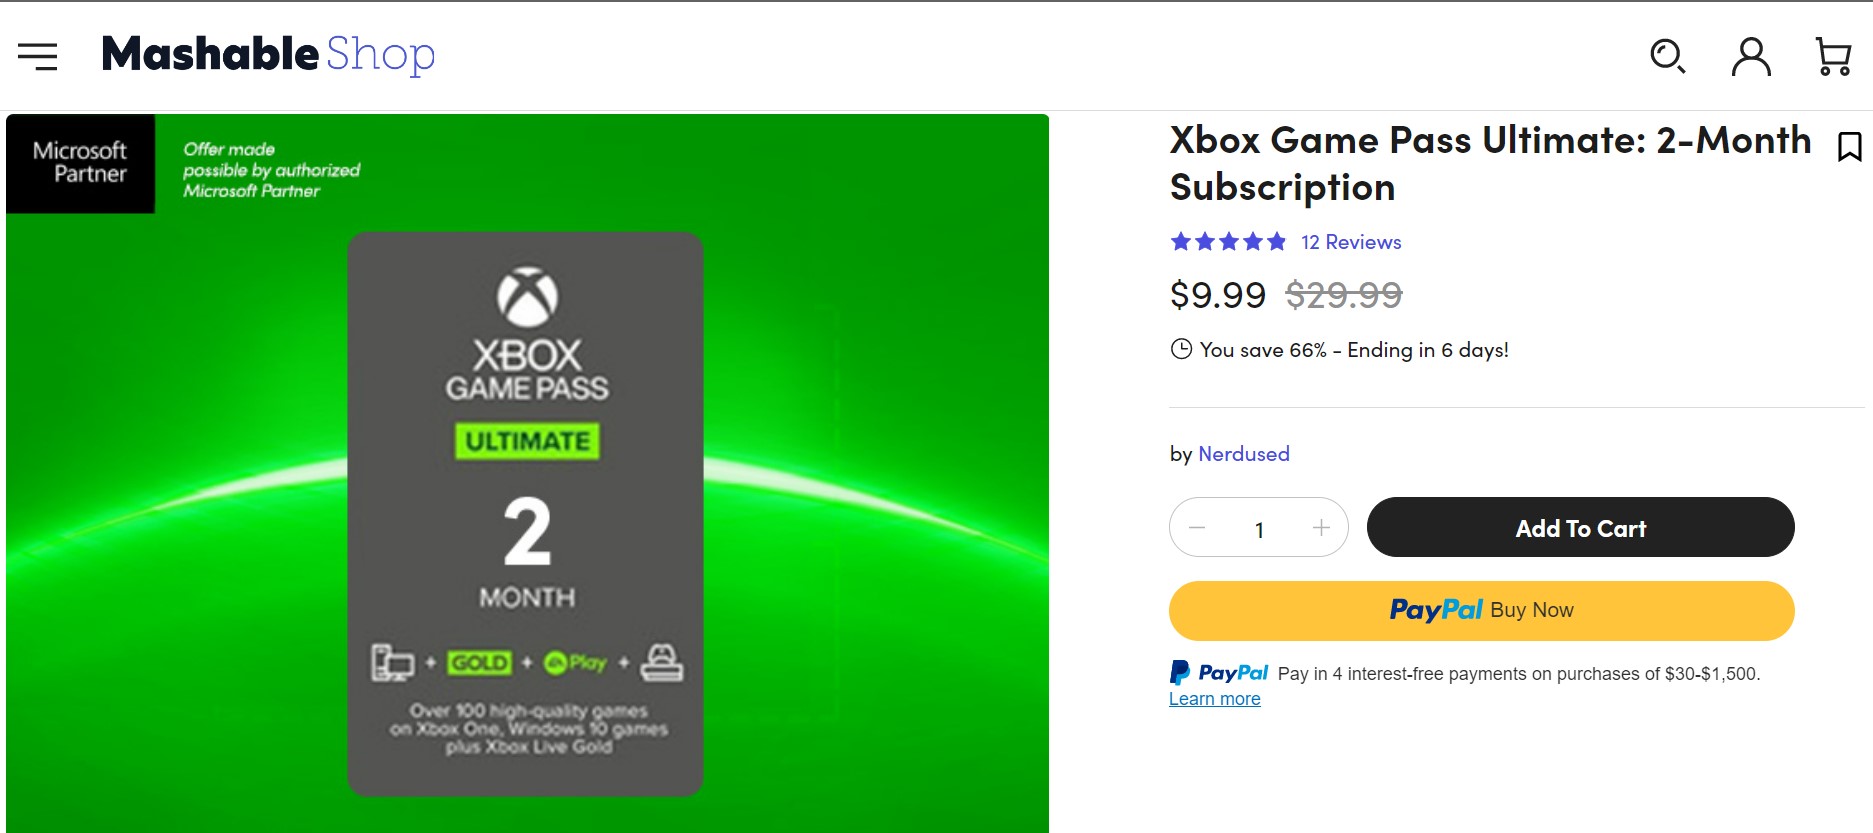 Xbox Game Pass Mashable offer